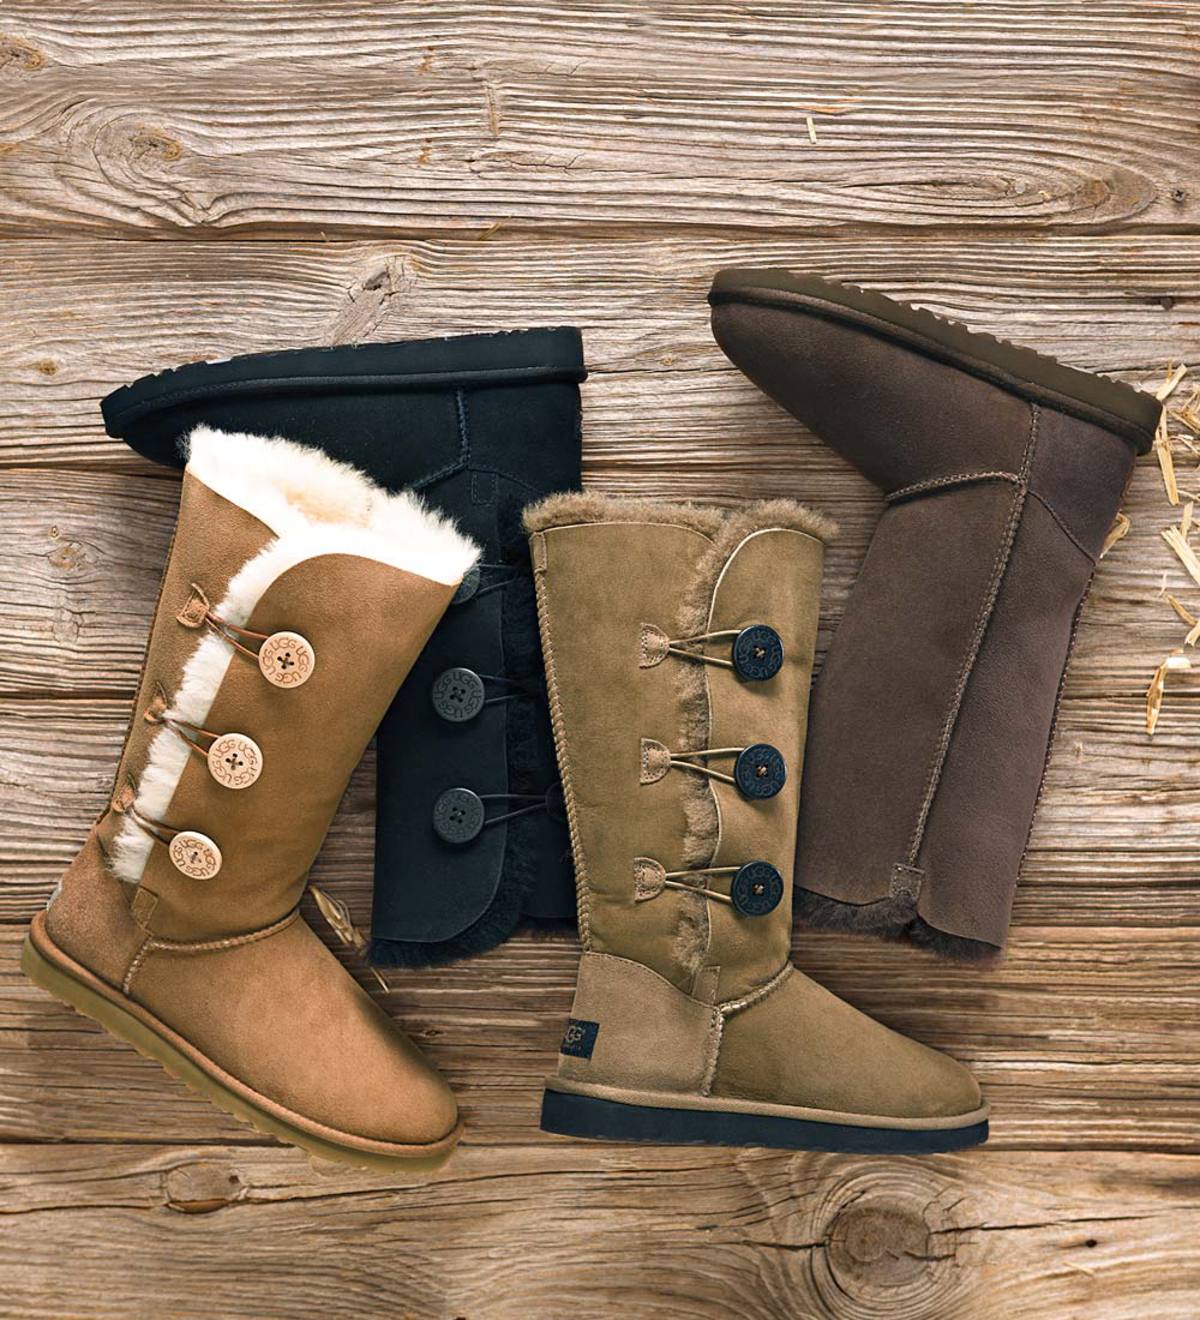 UGG Australia Bailey Bow Brown Boots for Women for sale